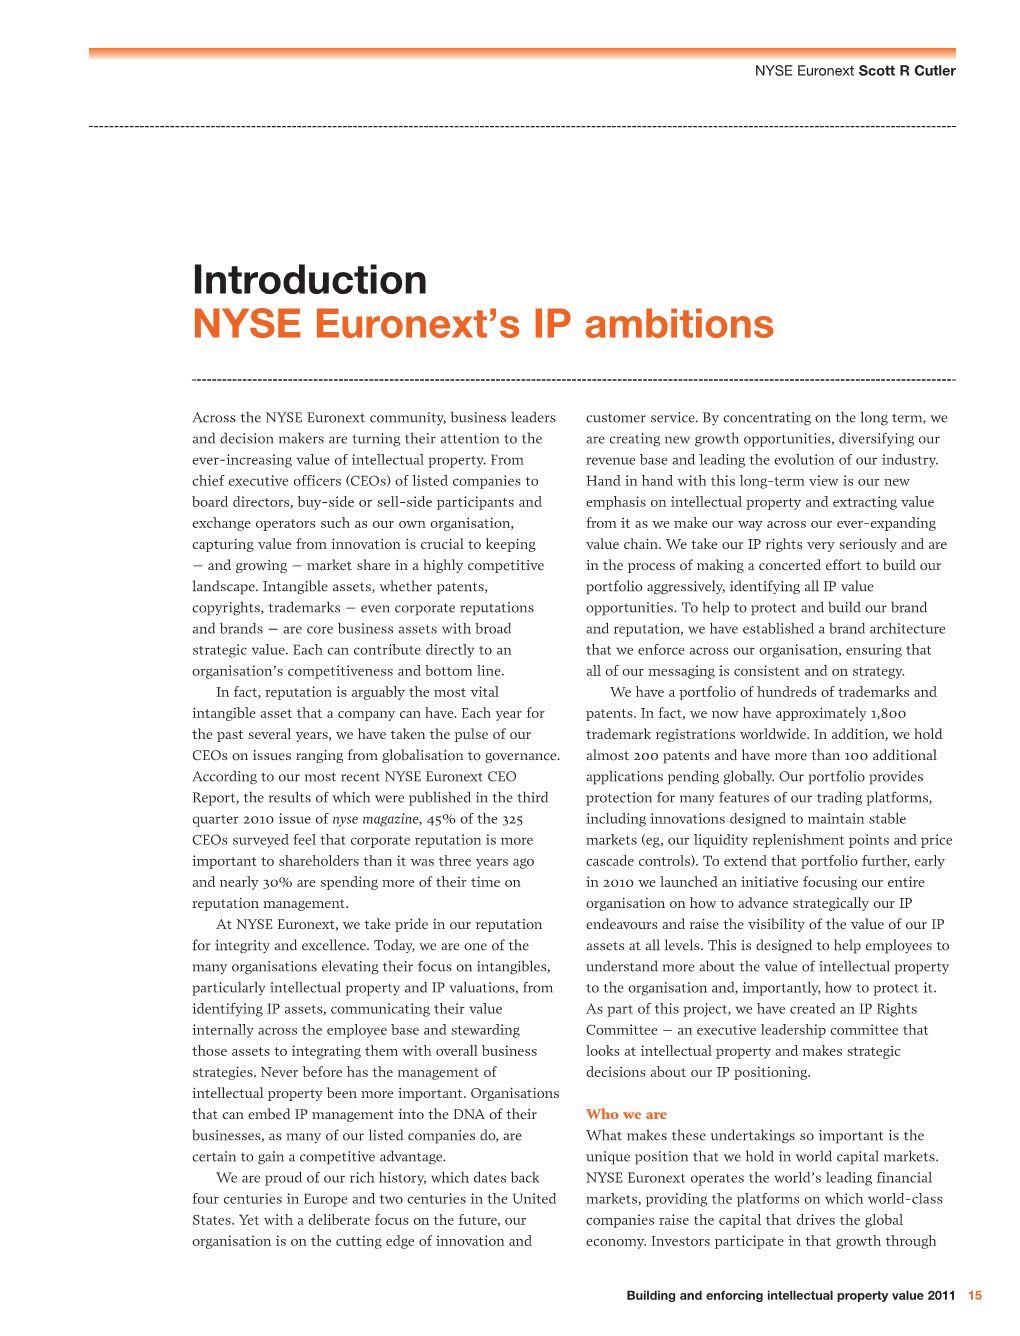 Introduction NYSE Euronext's IP Ambitions